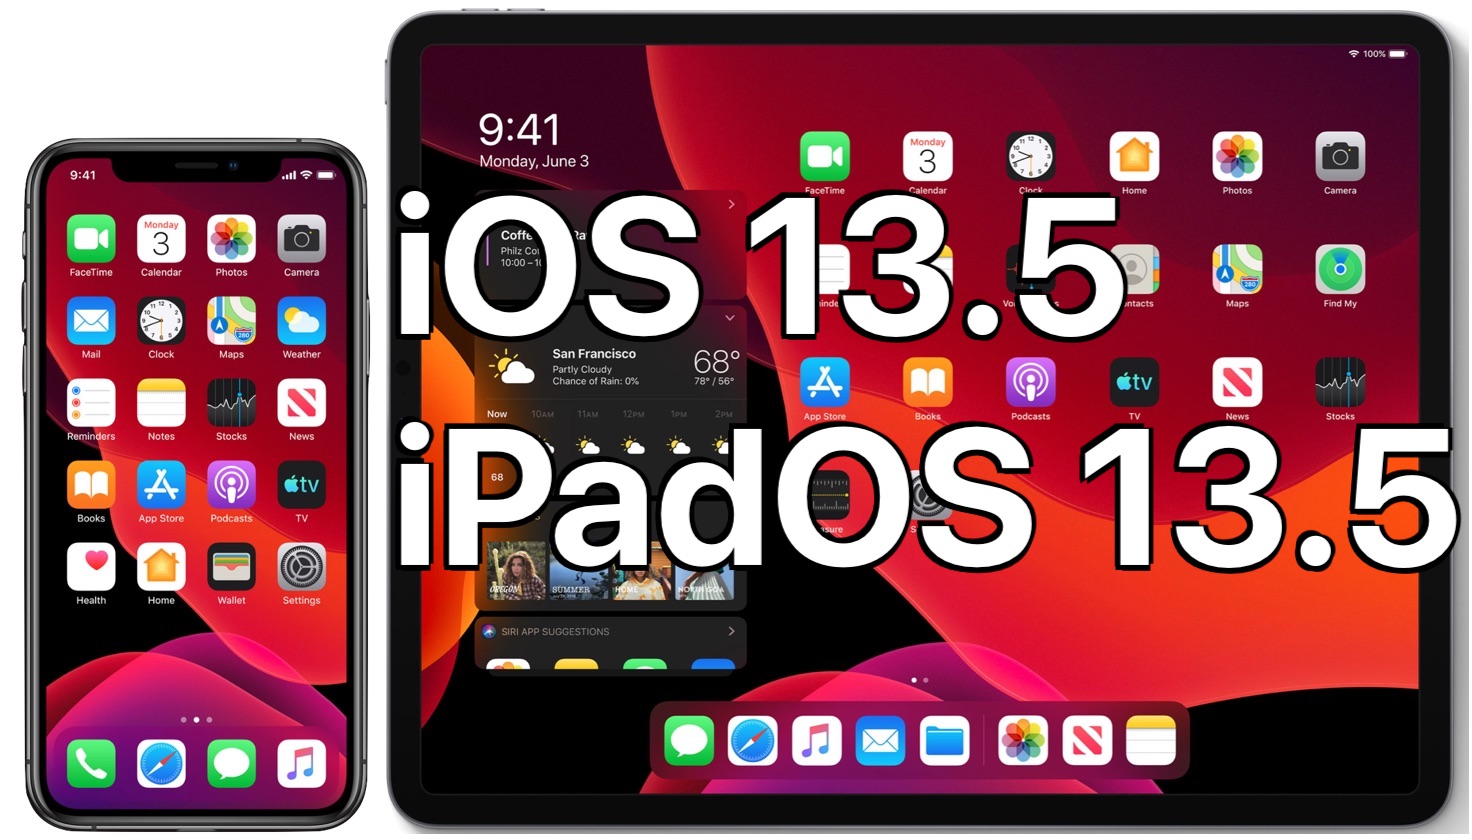 How to download ios 13 on macbook